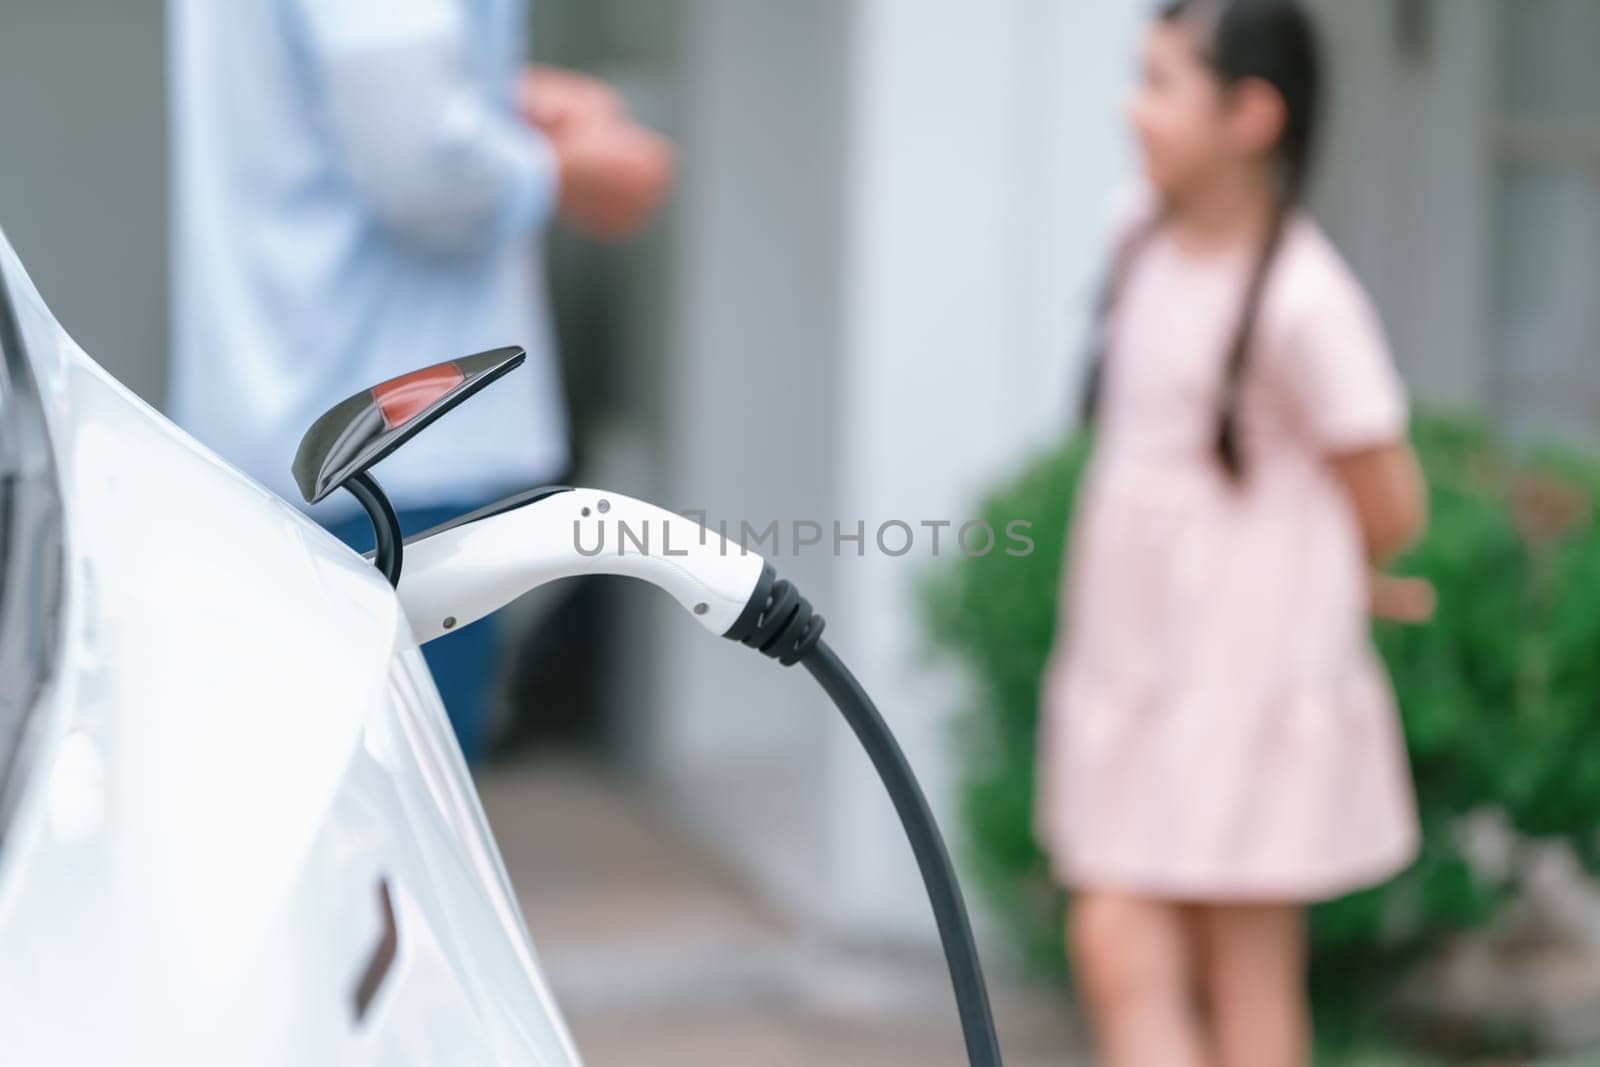 Focused electric vehicle recharging battery by home charging station. Synchronos by biancoblue